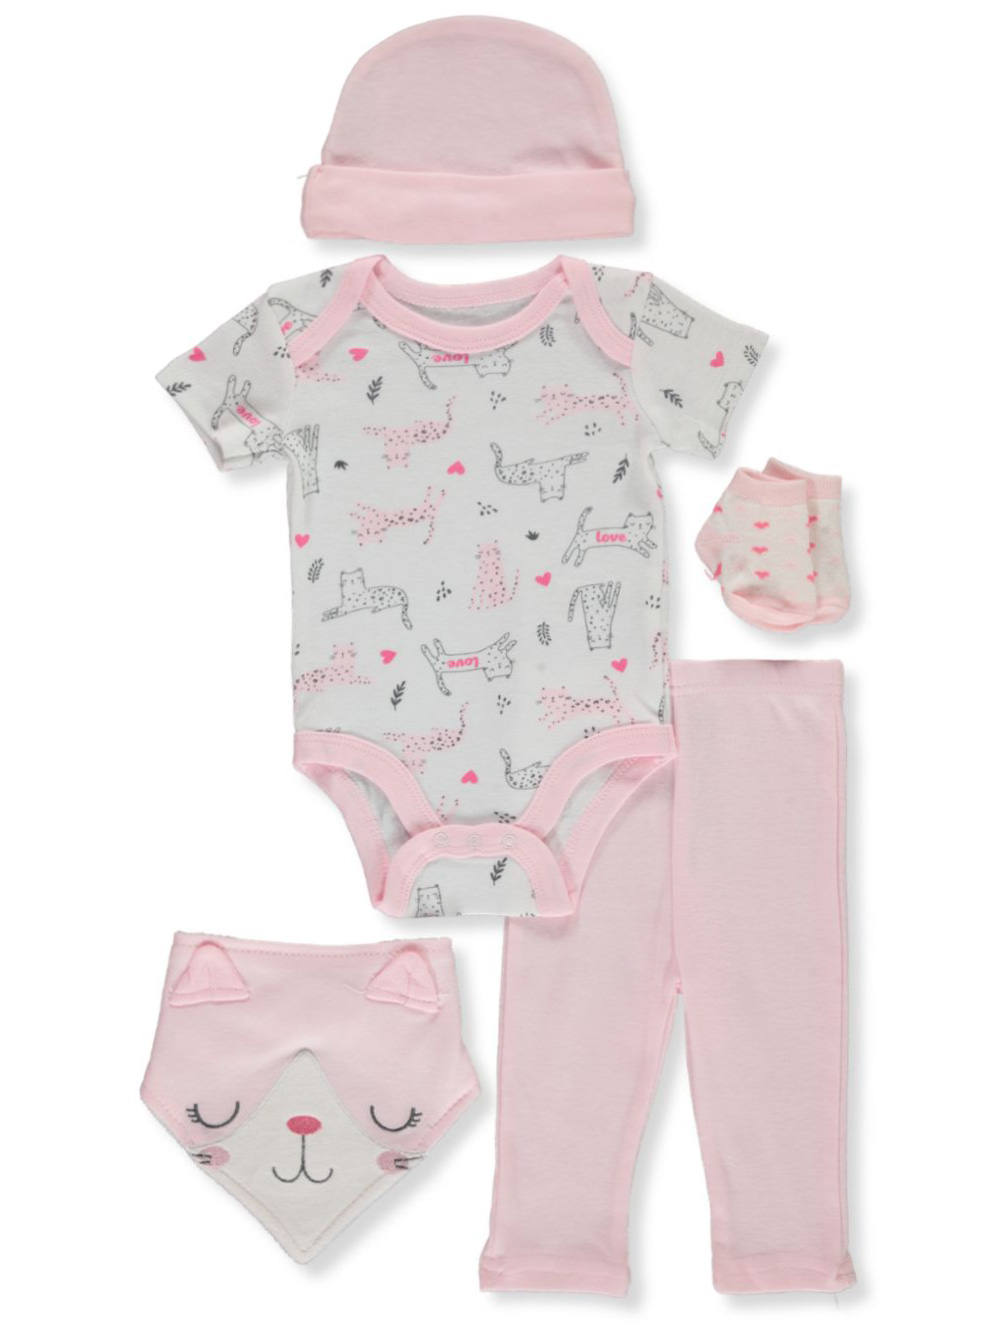 Gift Sets 5-Piece Layette Gift Set